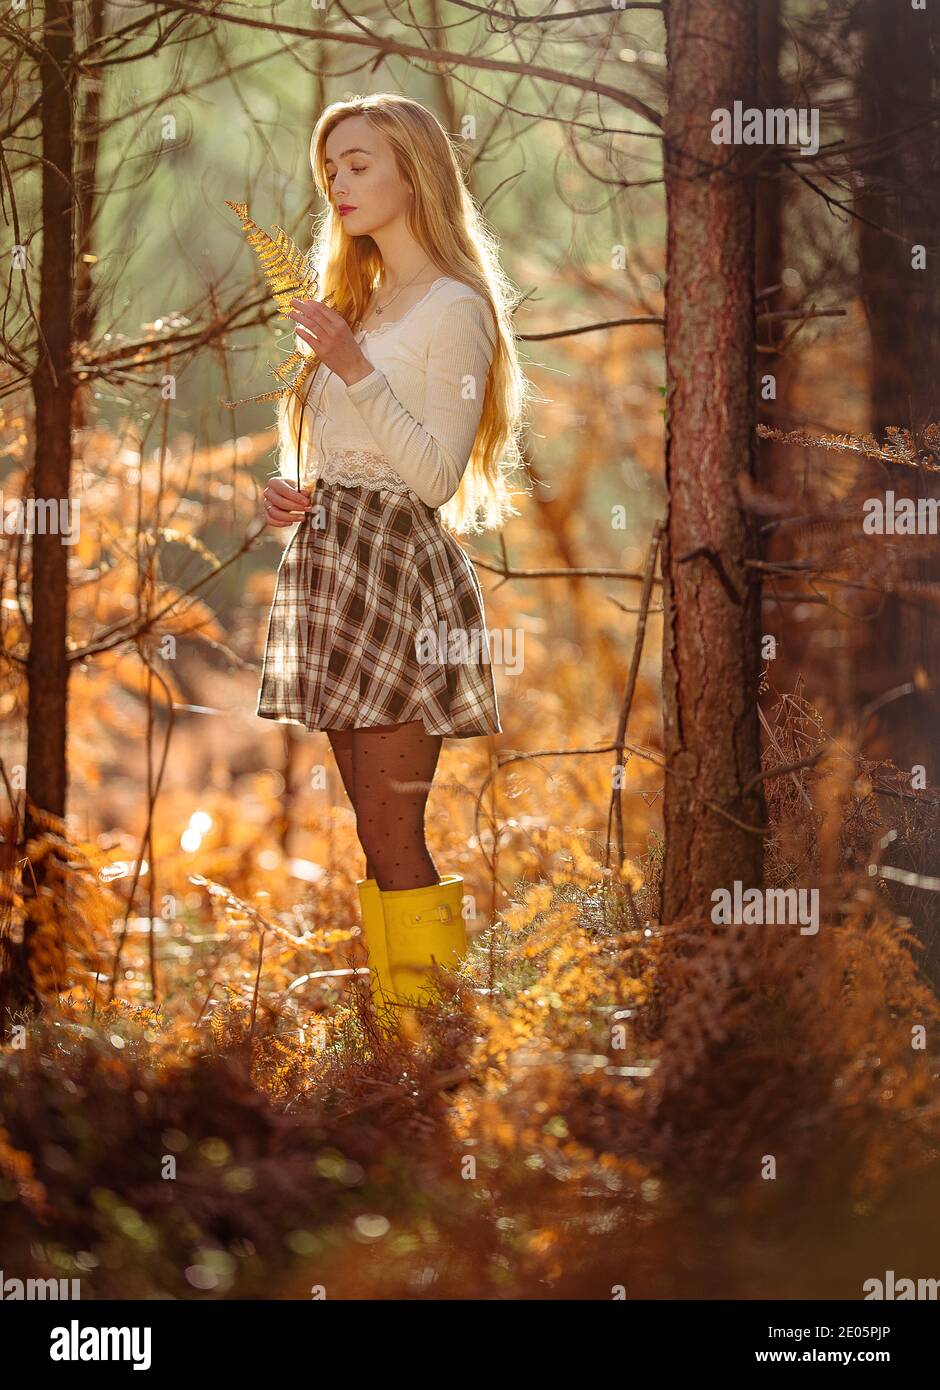 A young naturally beautiful women (age 20) connects with nature in a dreamy image with autumnal hues backlit with sunshine in the New Forest  England. Stock Photo